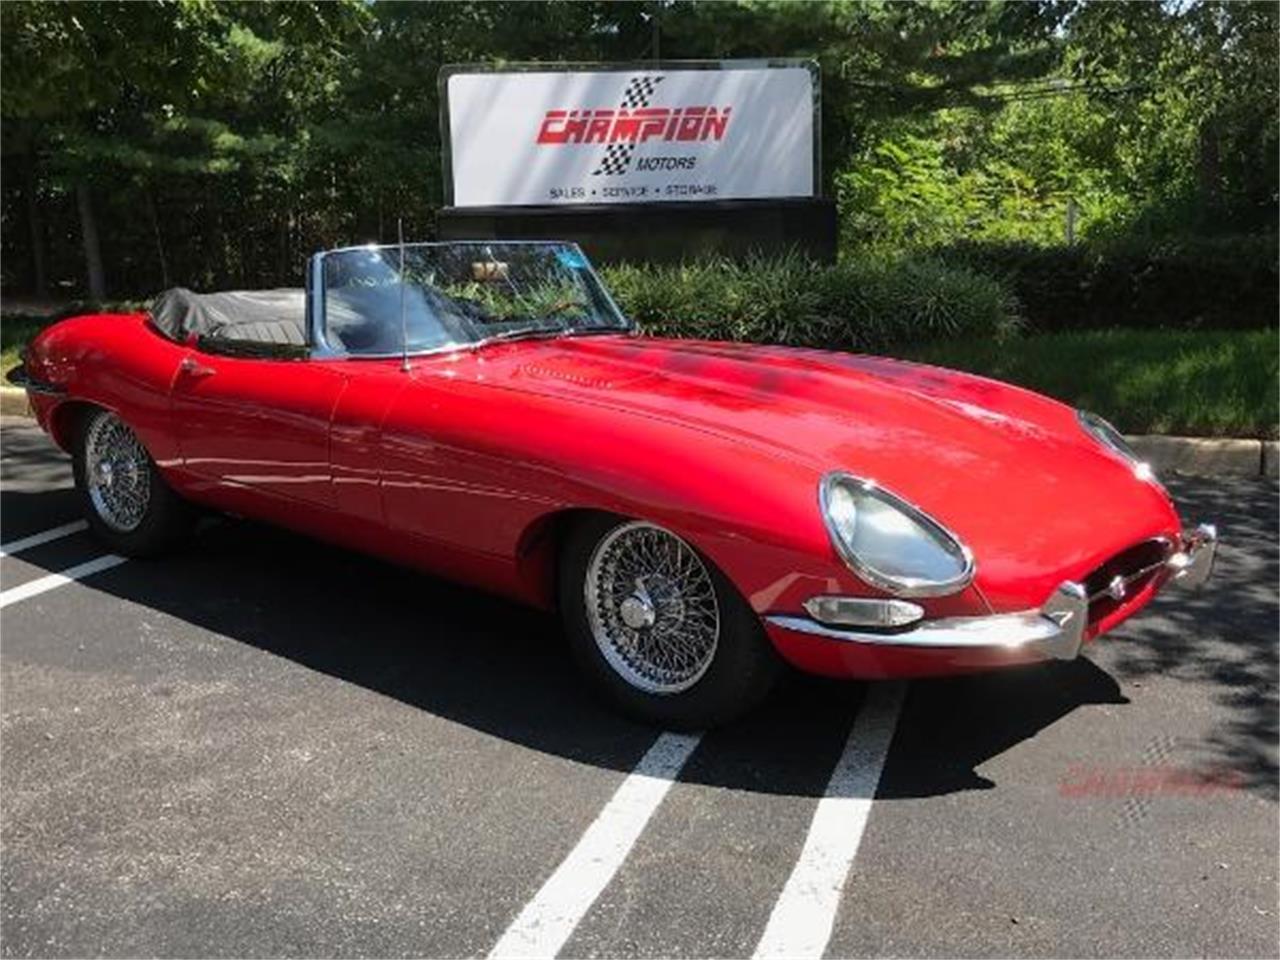 1967 Jaguar E Type For Sale In Syosset Ny Classiccarsbay Com